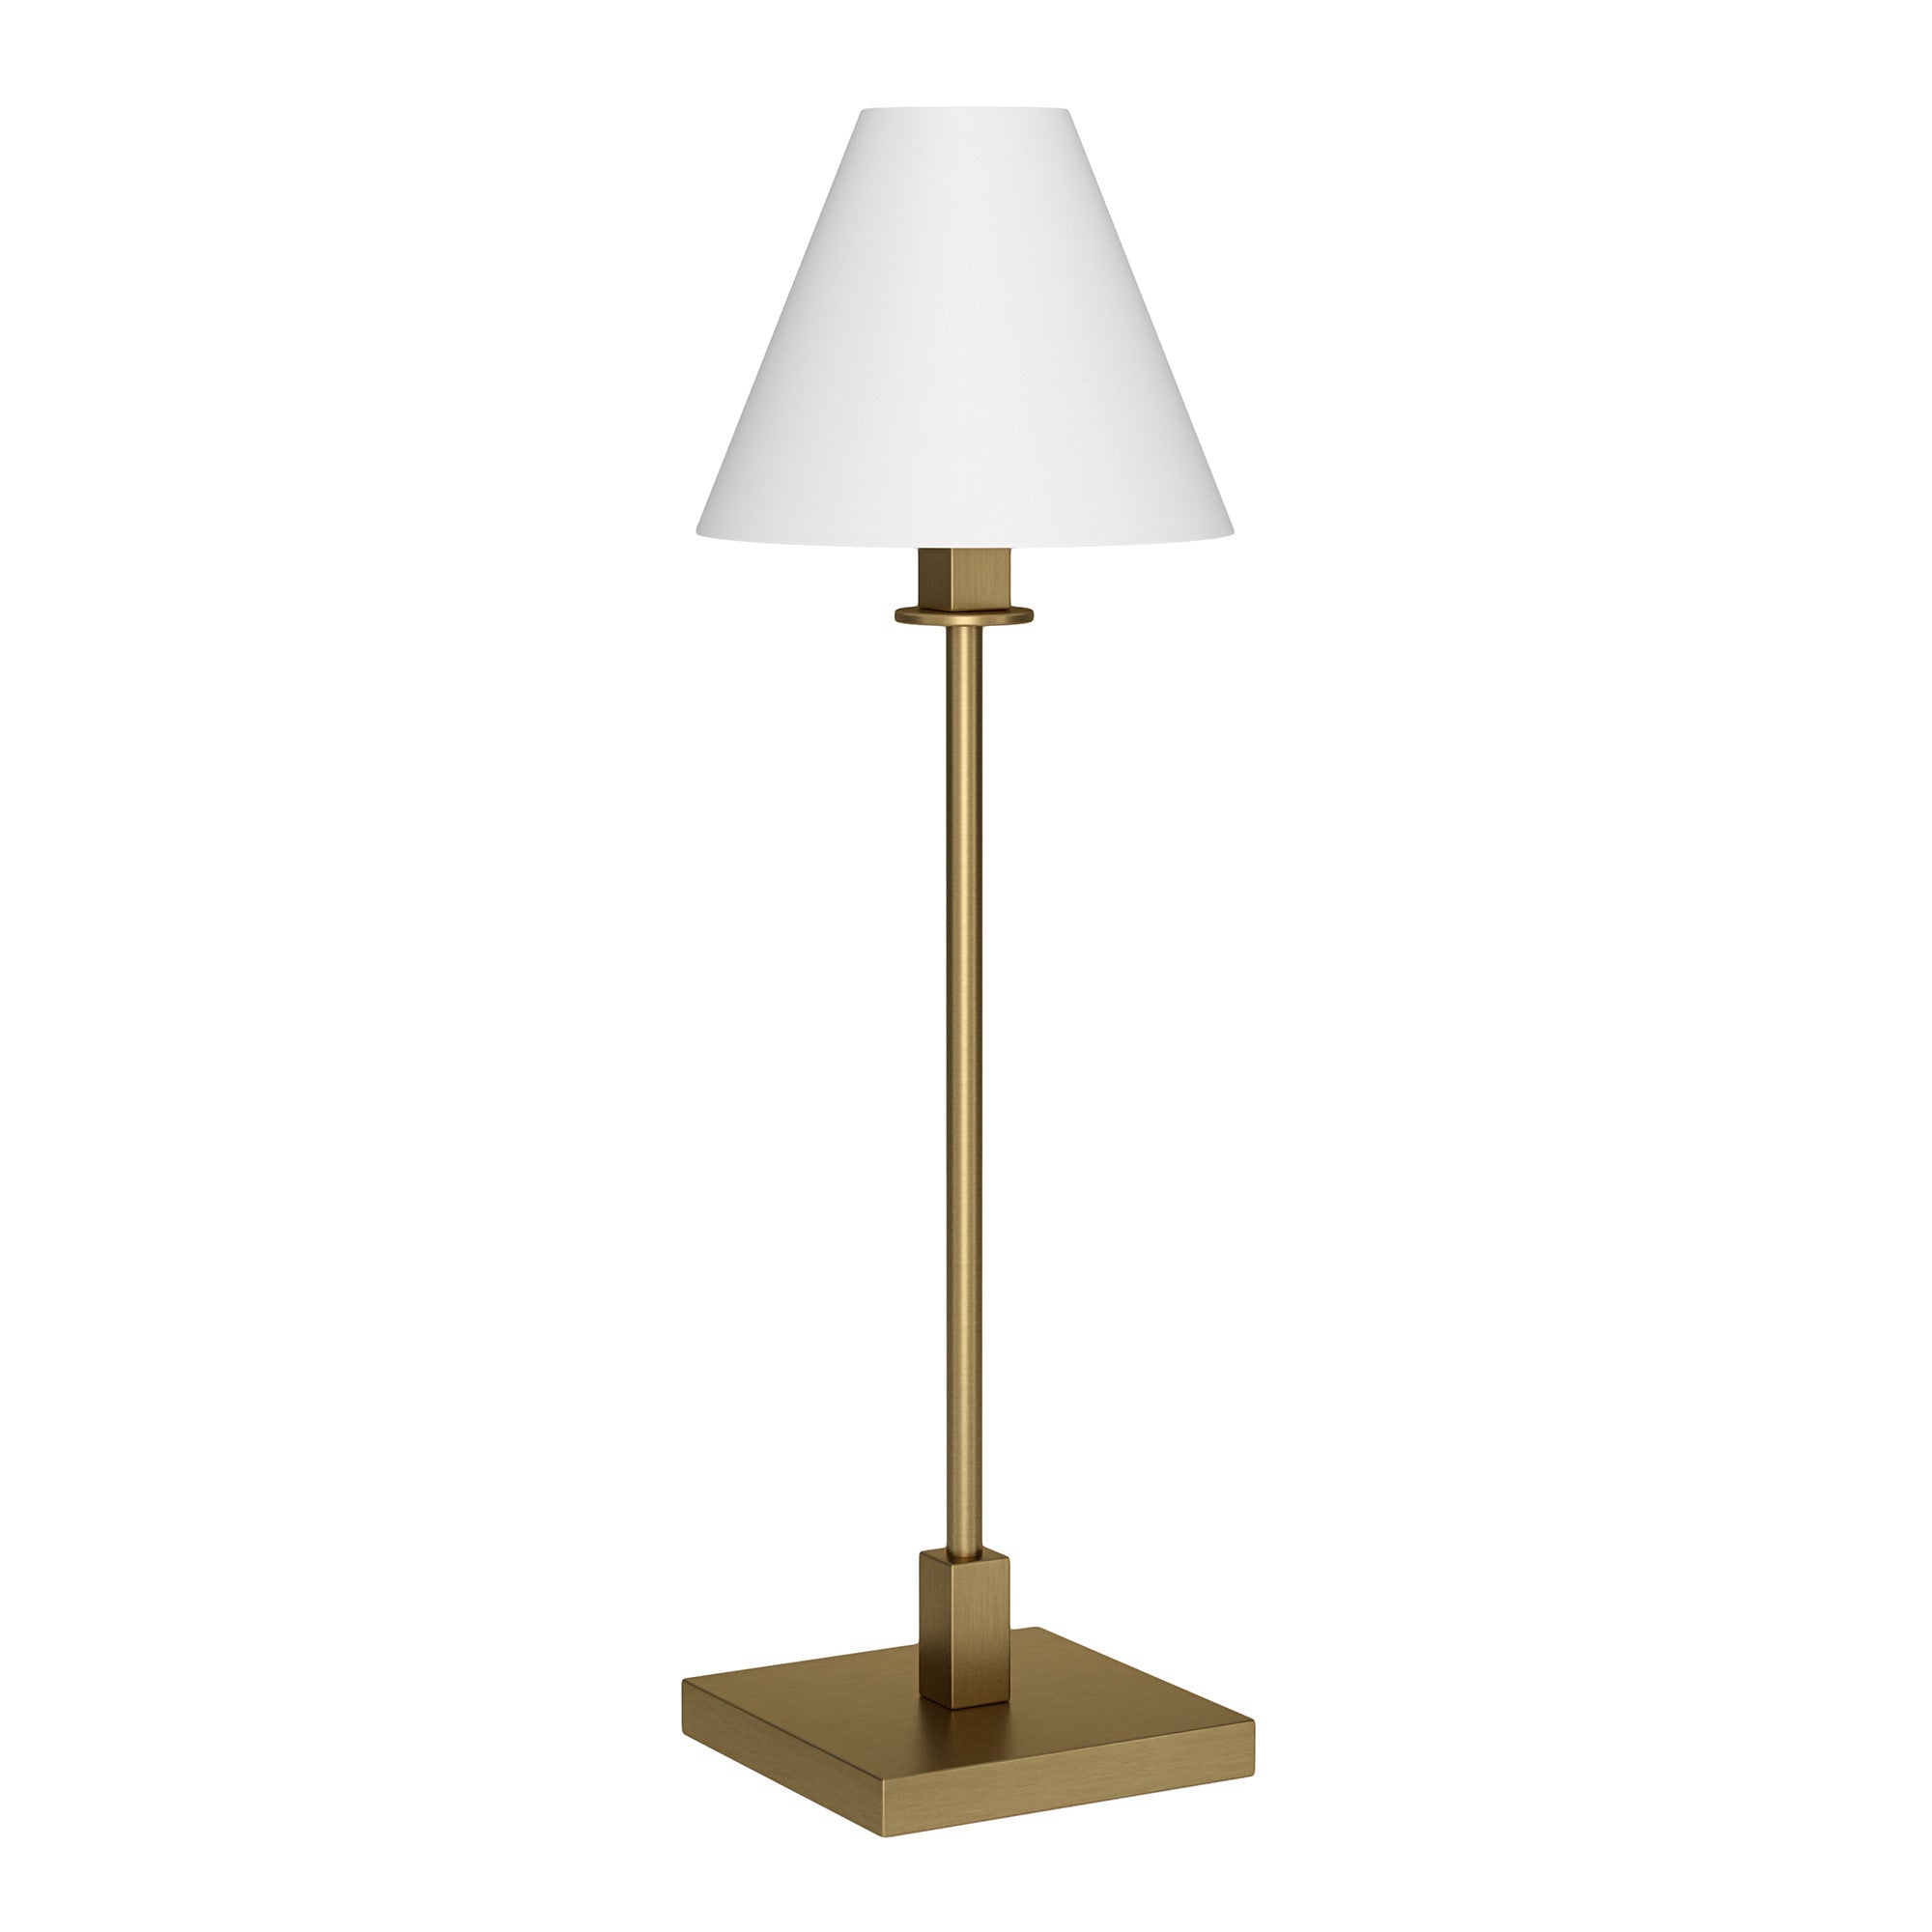 28" Brass Metal Candlestick Table Lamp With White Cone Shade